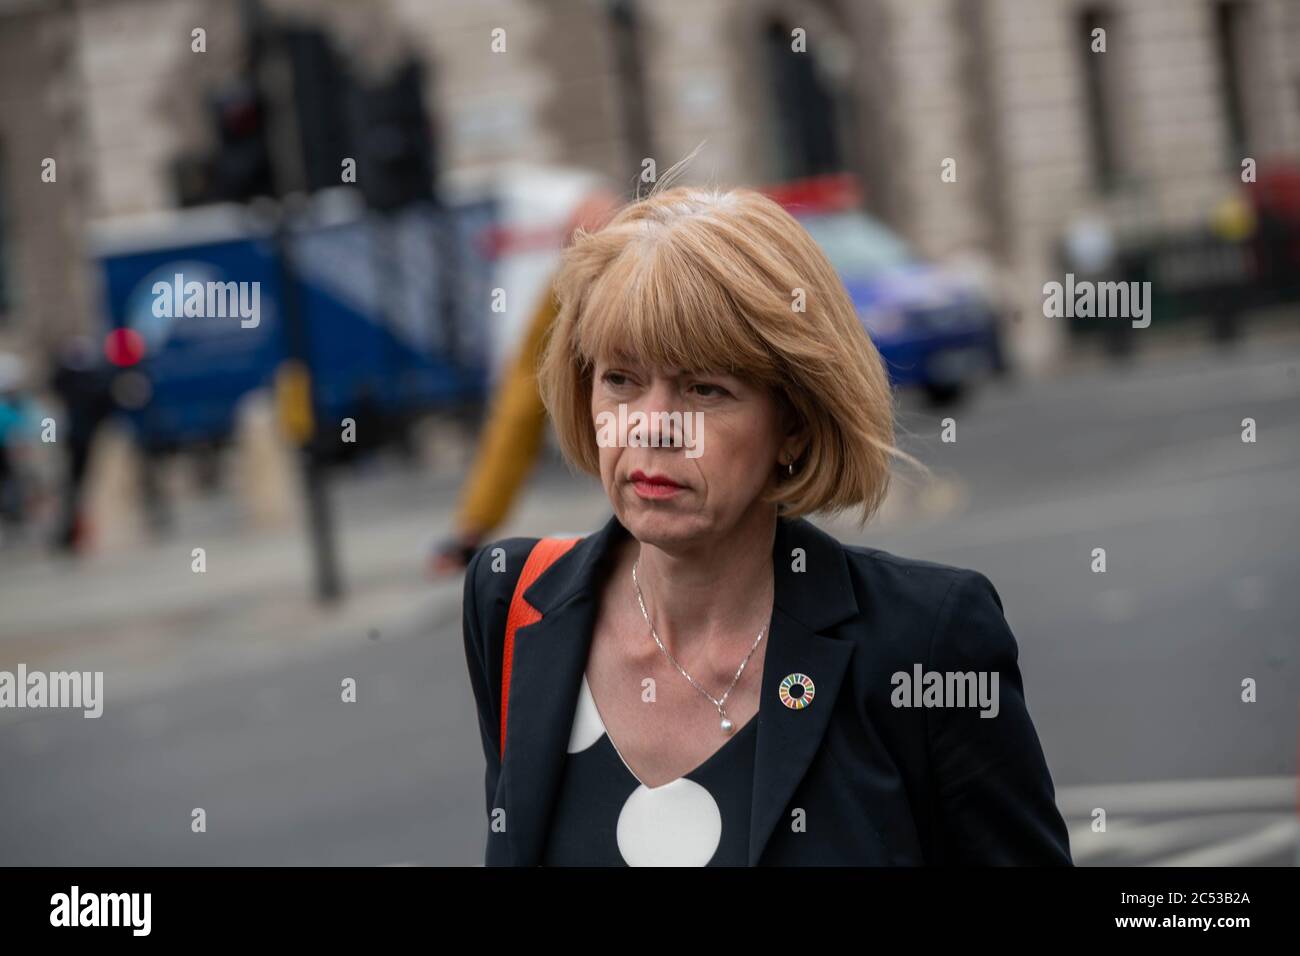 London, UK. 30th June, 2020. Wendy Morton MP, Under Secretary of State in the Foreign and Commonwealth Office and the Department for International Development arrives at the House of Commons Credit: Ian Davidson/Alamy Live News Stock Photo